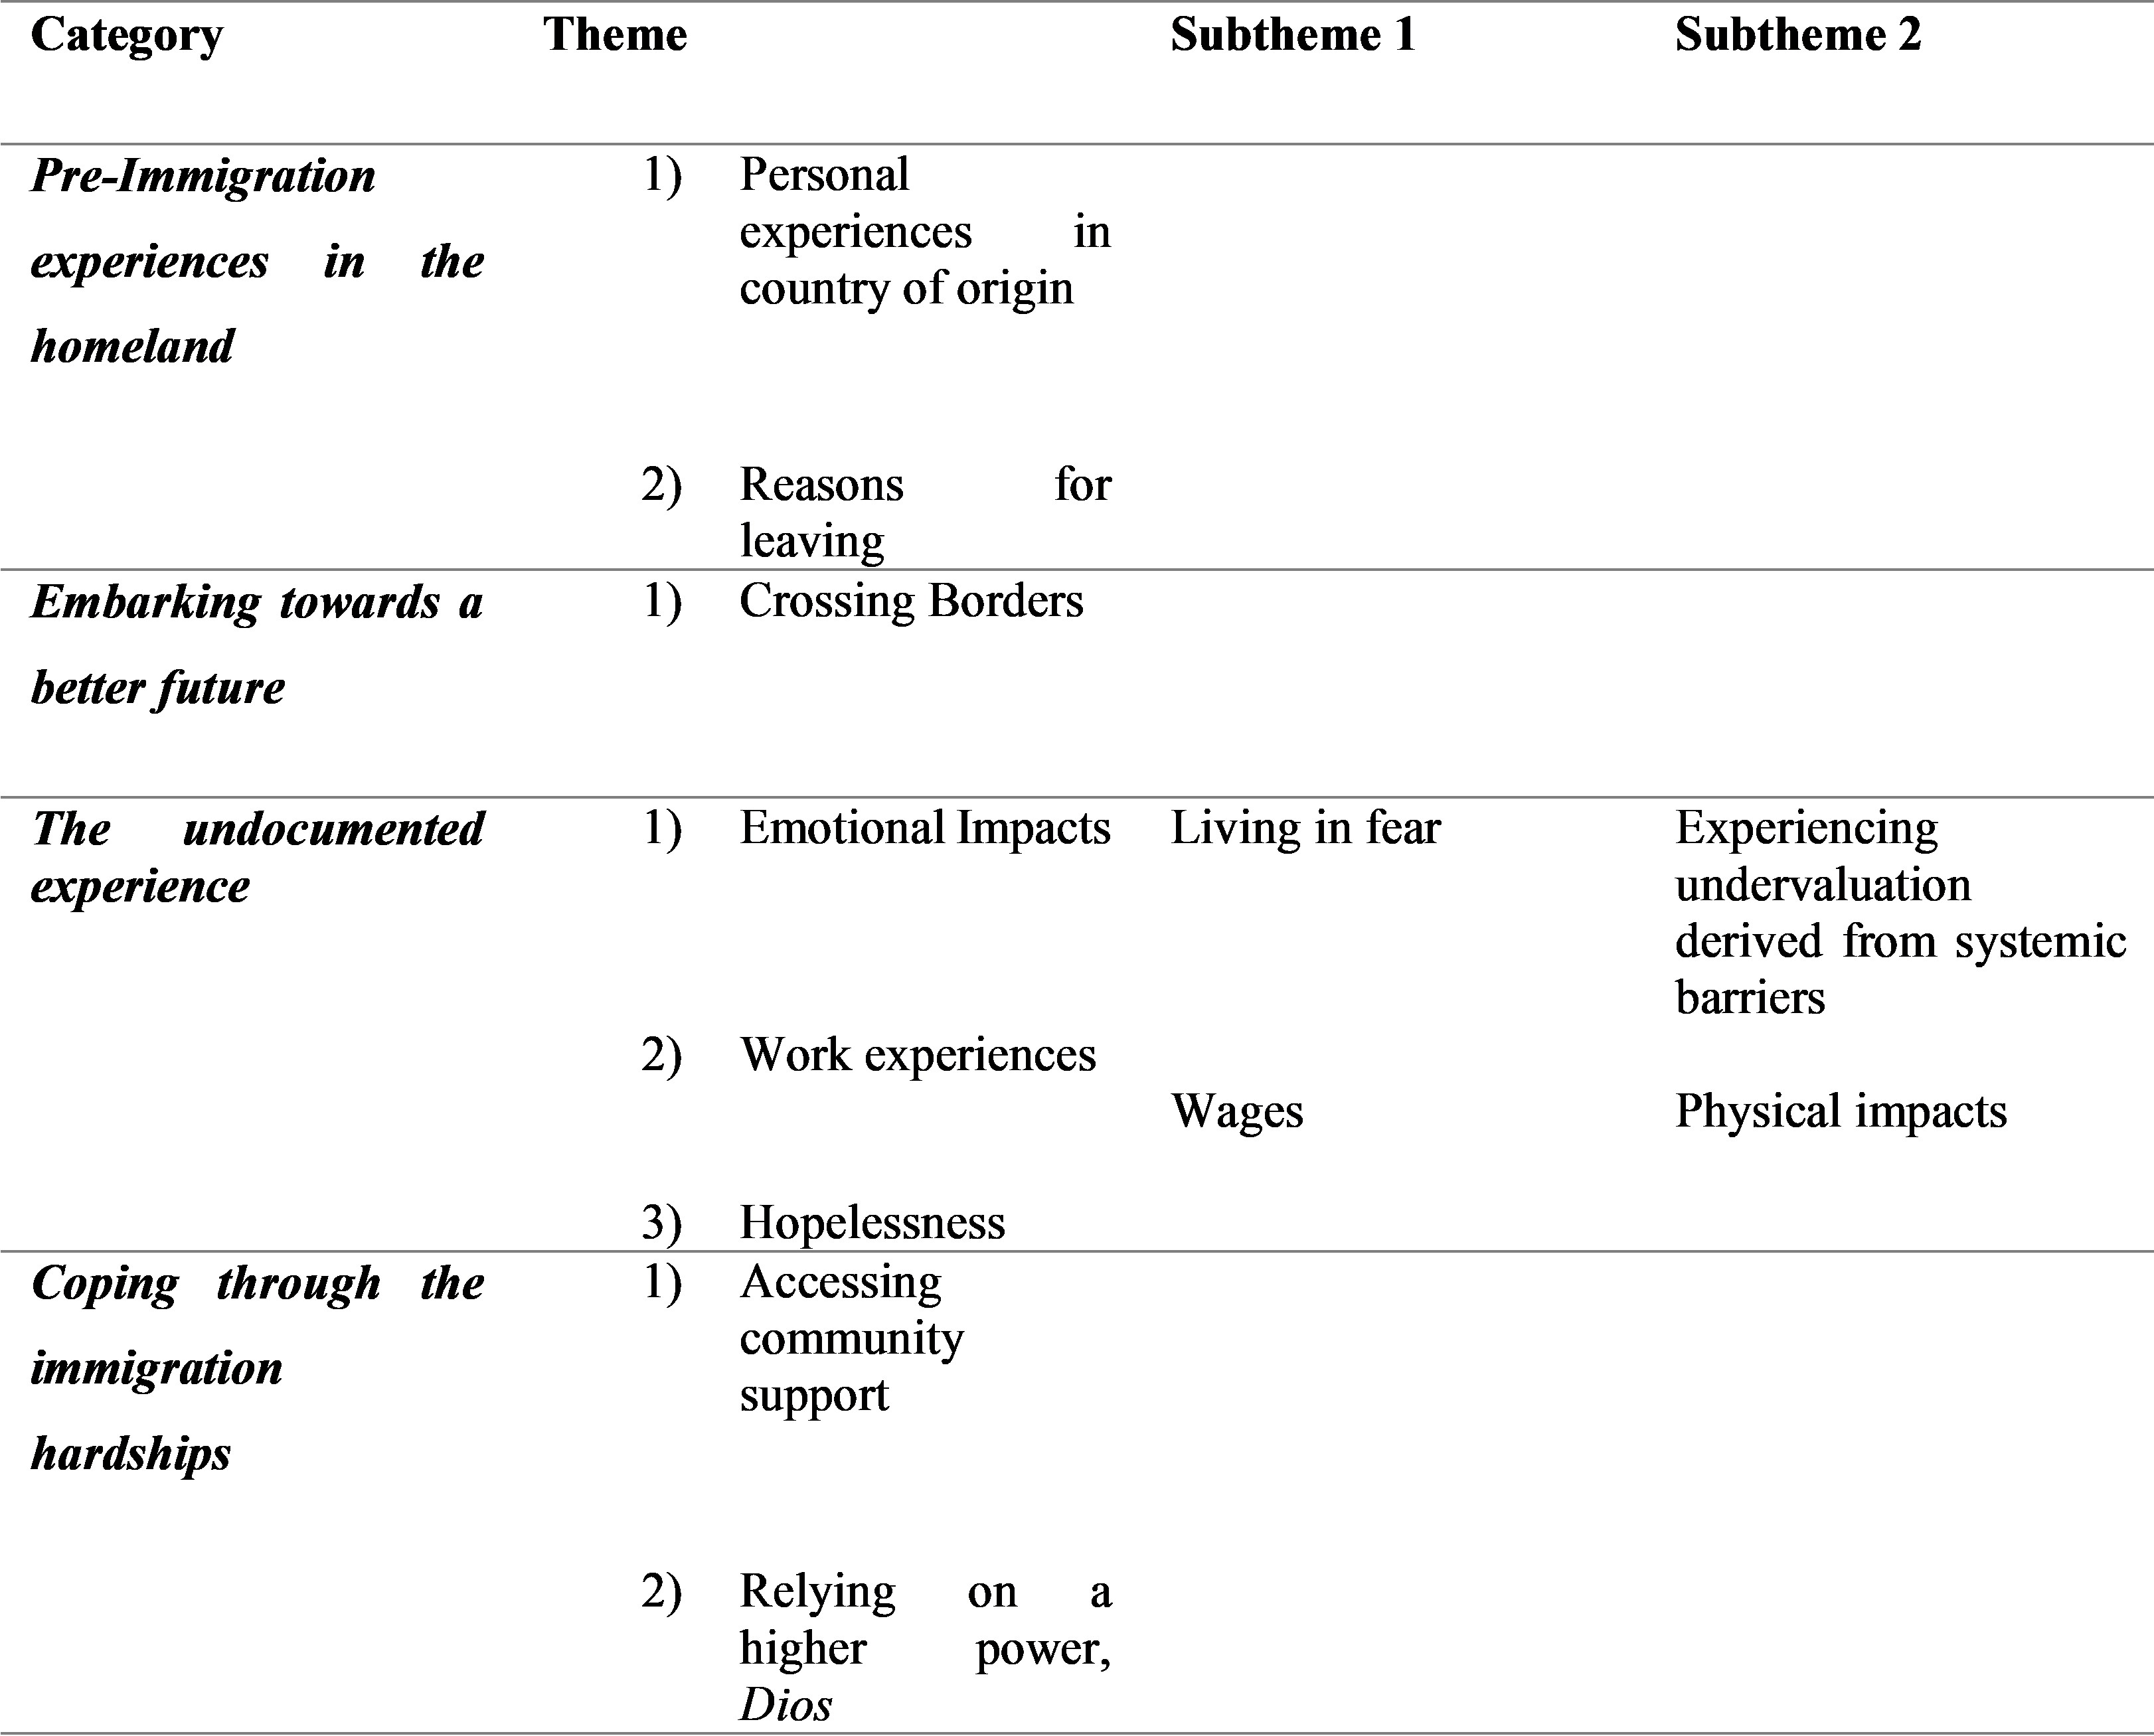 
Table of Themes
